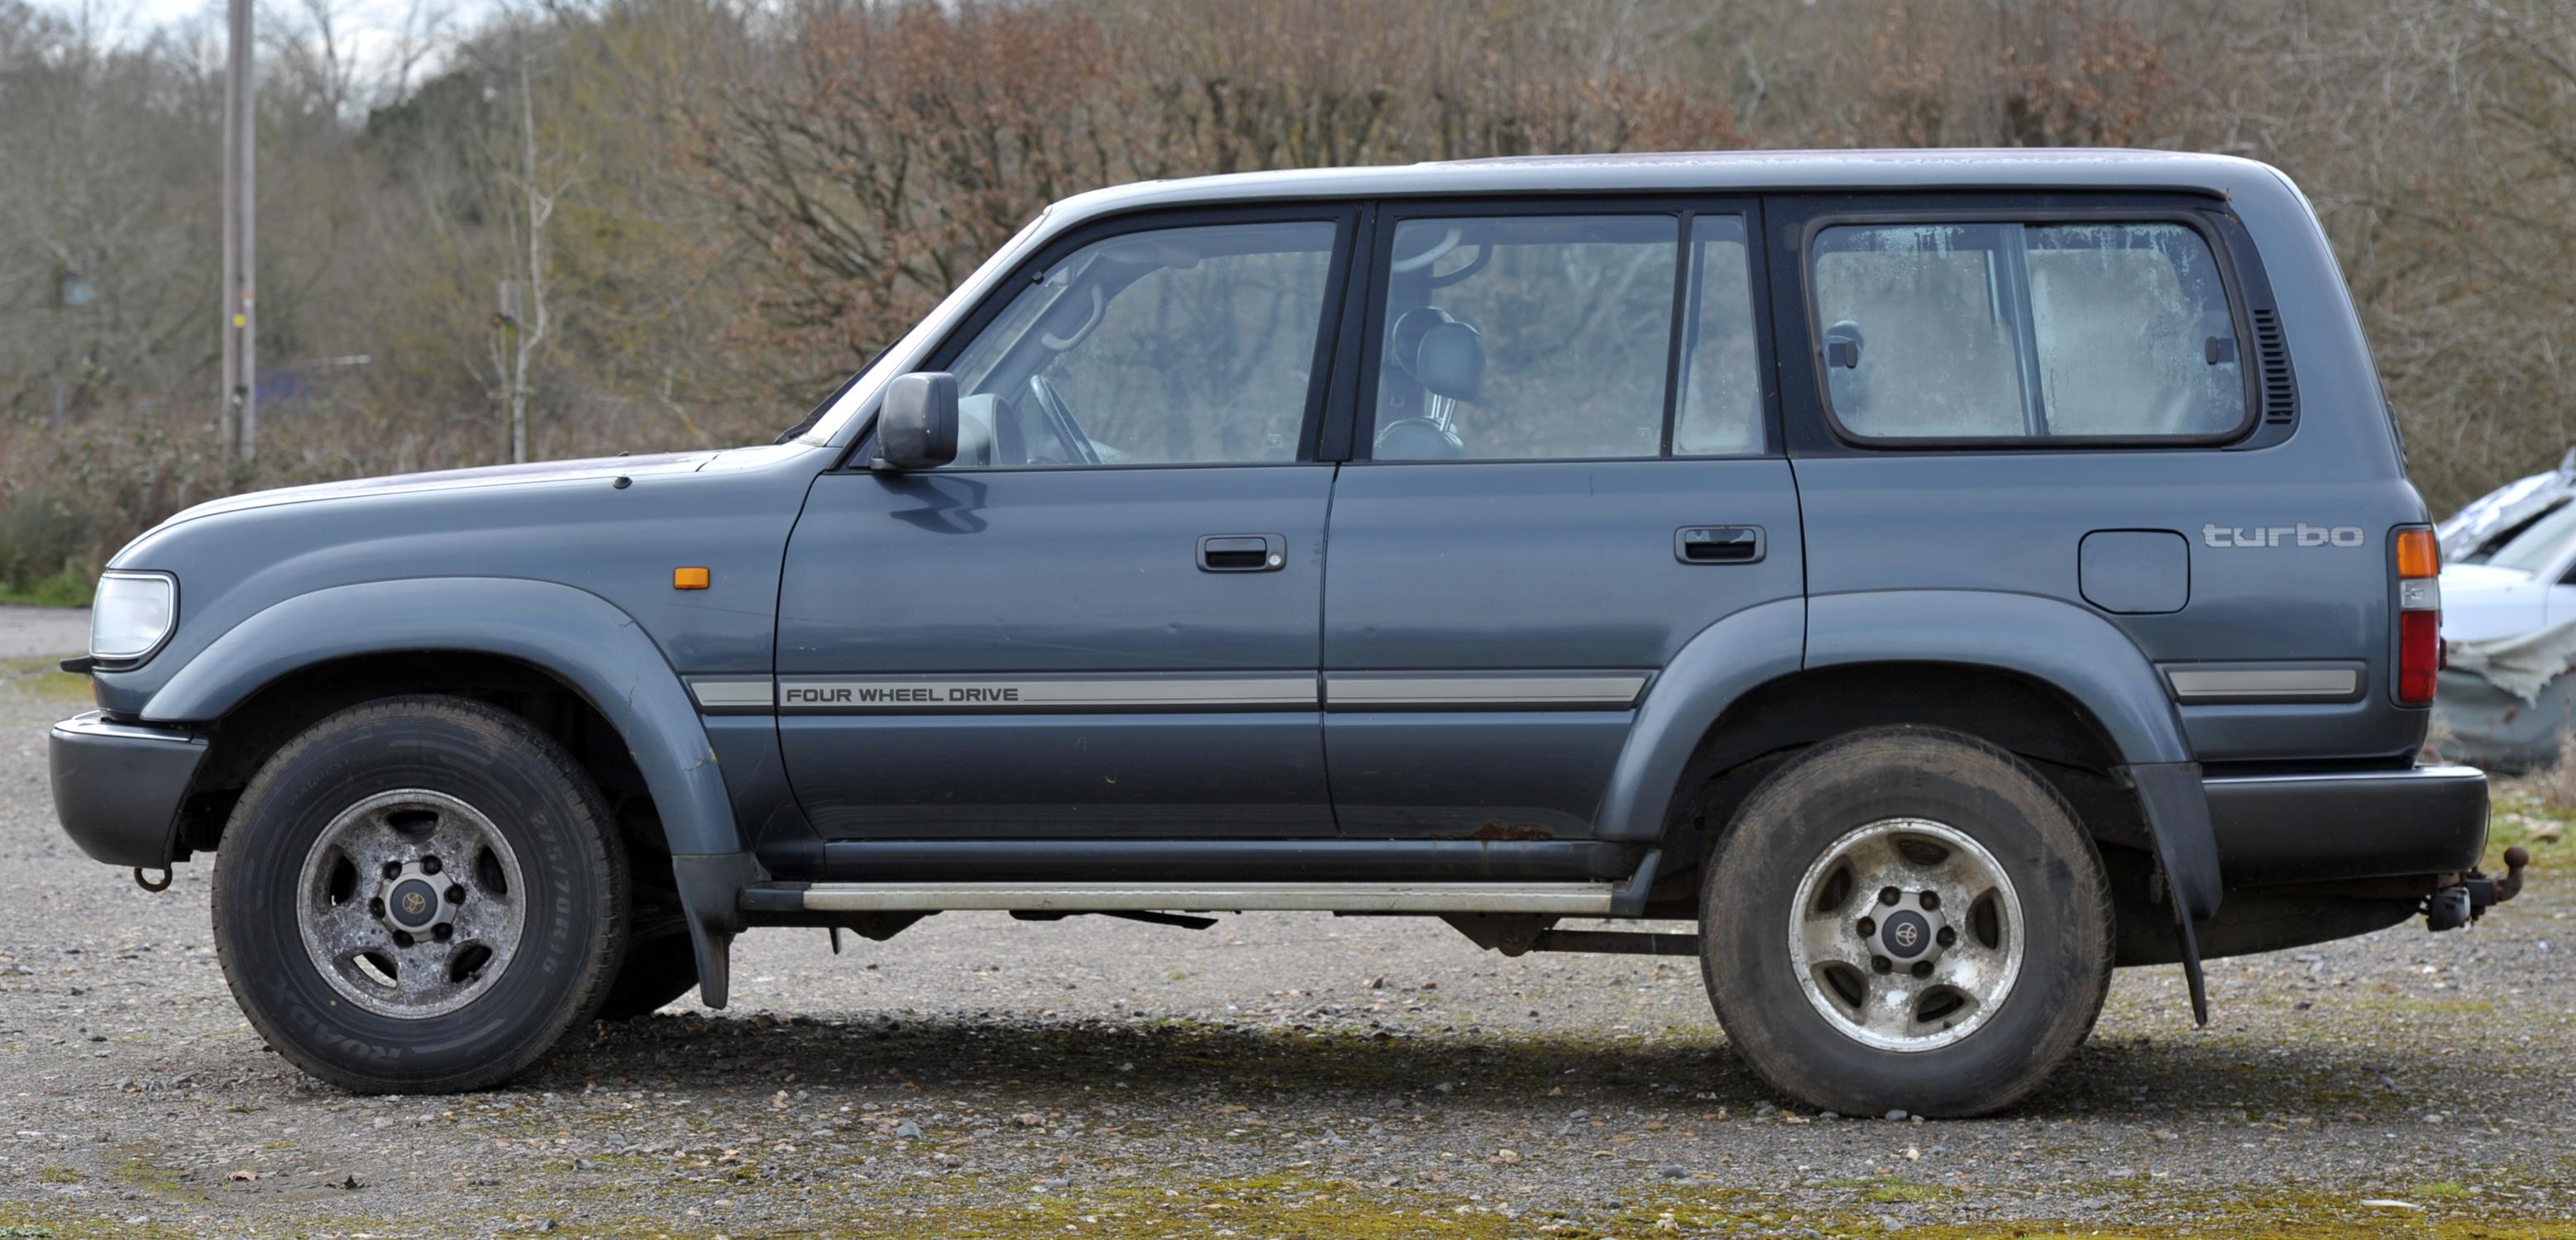 1993 Toyota Land Cruiser VX 80 series 4.2 Diesel Automatic. Registration number: L253 ABL. - Image 5 of 14